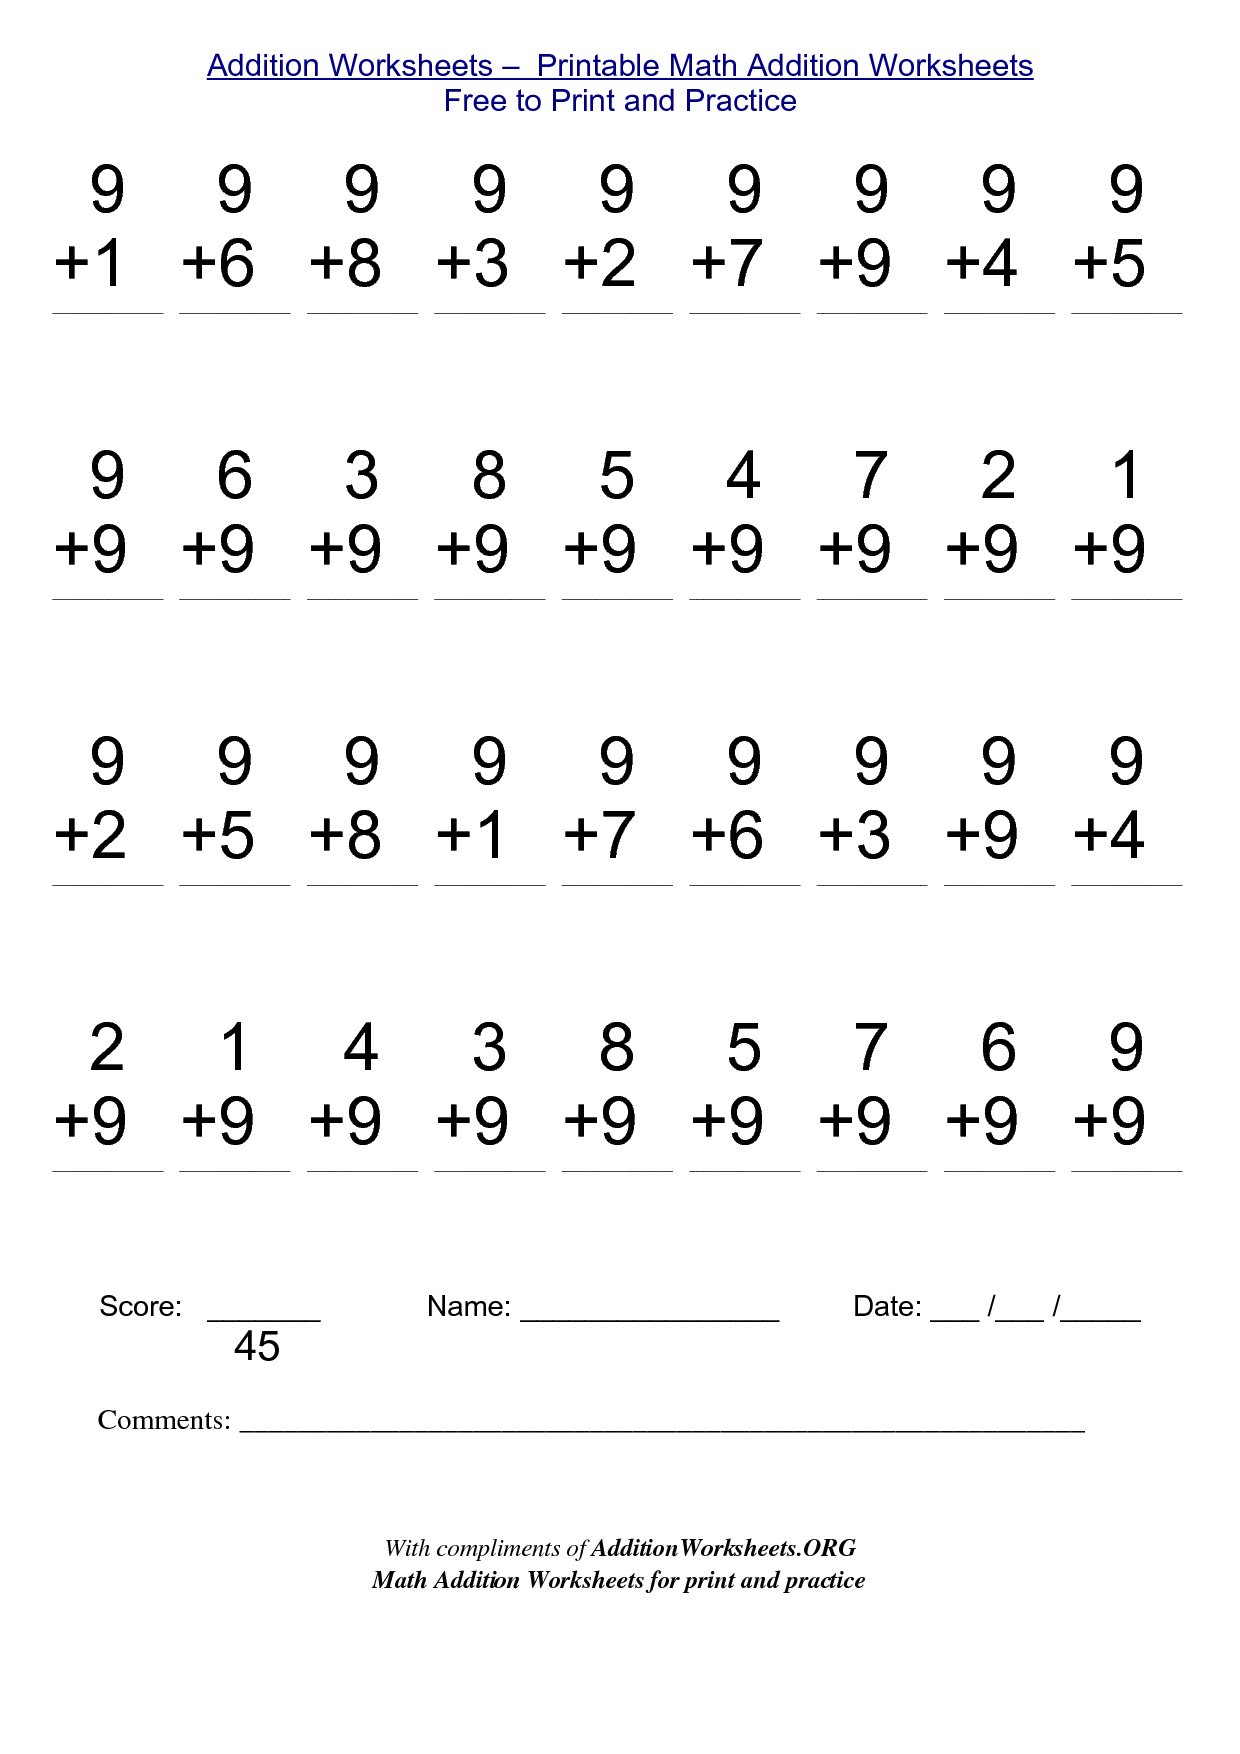 Math Worksheets For Free To Print - Alot | Me | Math Worksheets - Free Printable Math Worksheets